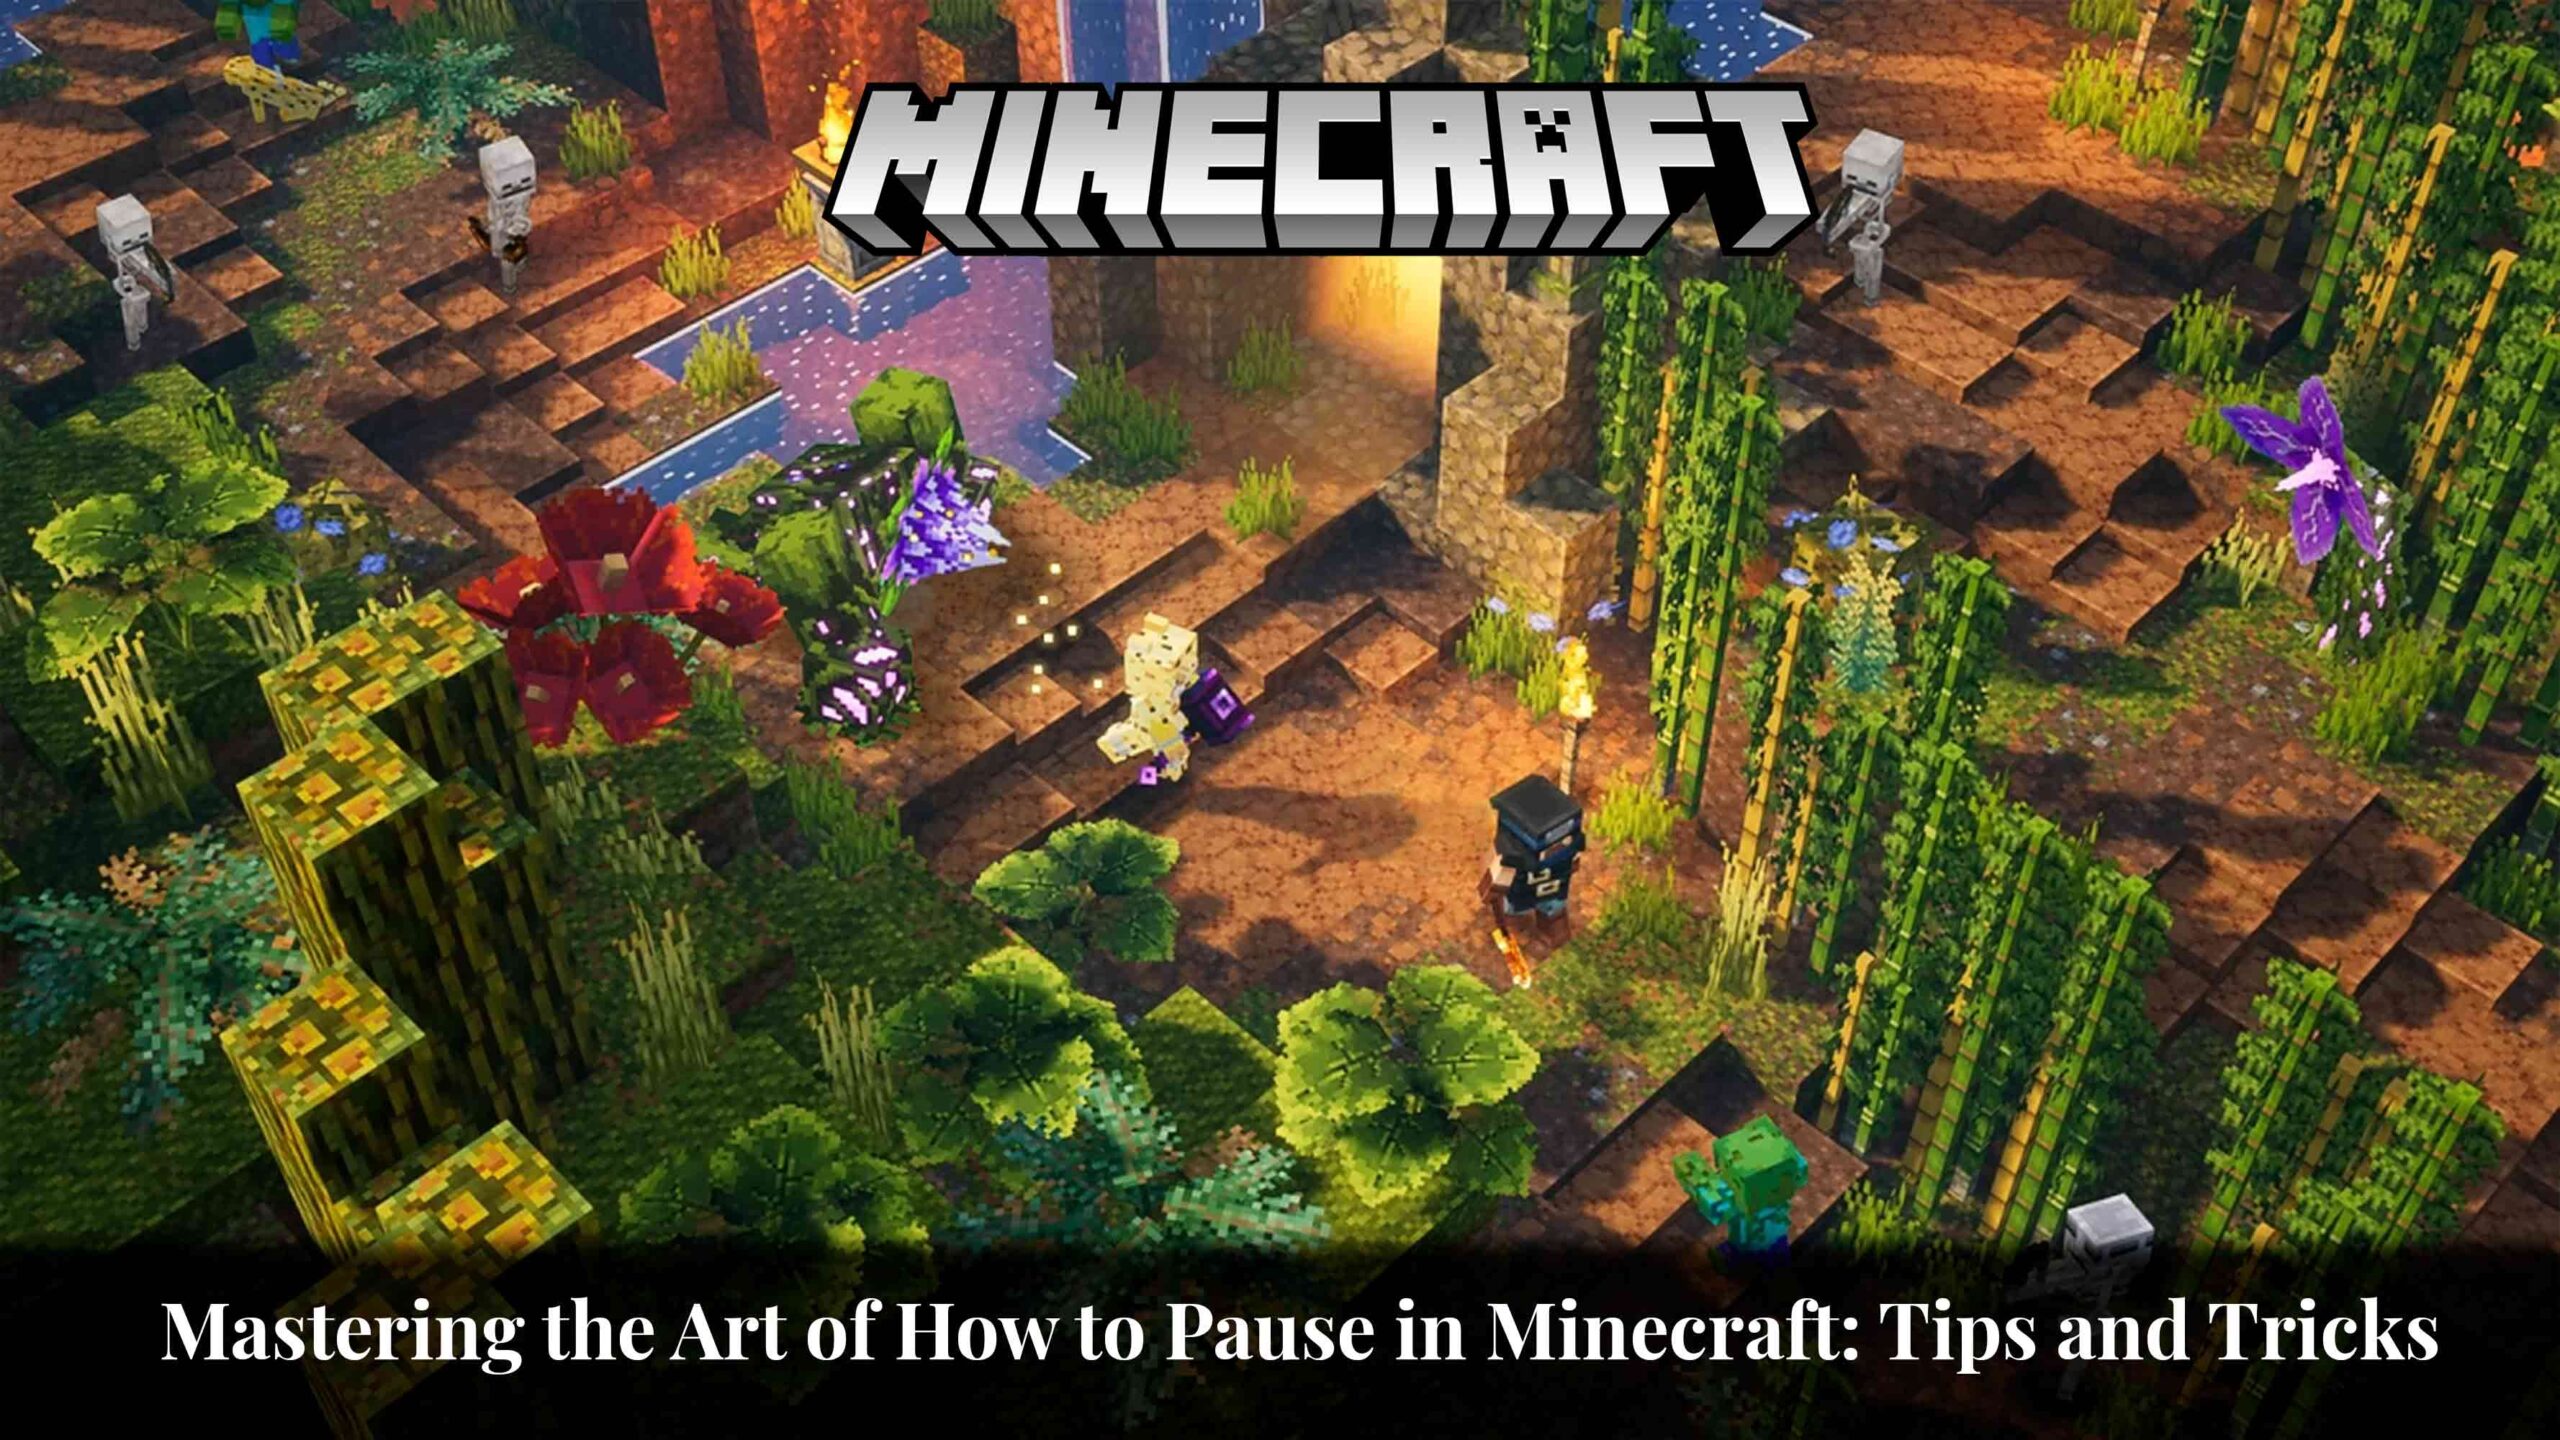 How to Pause in Minecraft